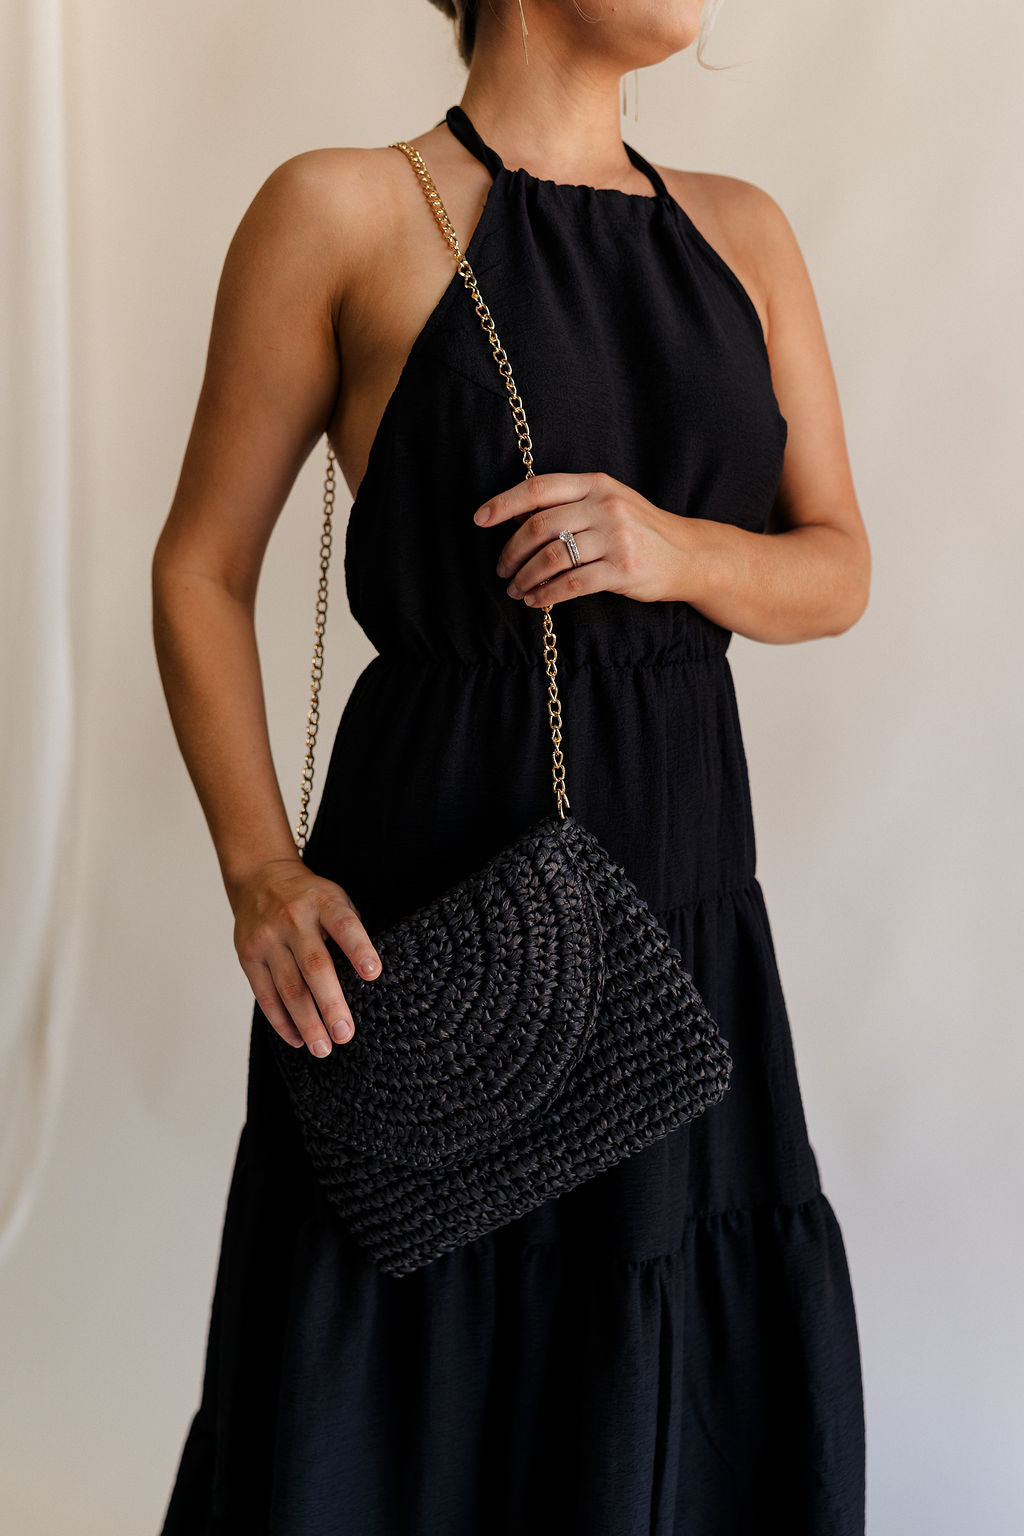 Model is wearing on shoulder the Sofia Black Woven Raffia Purse that has black raffia, a foldover closure with a magnet, and a gold crossbody strap.